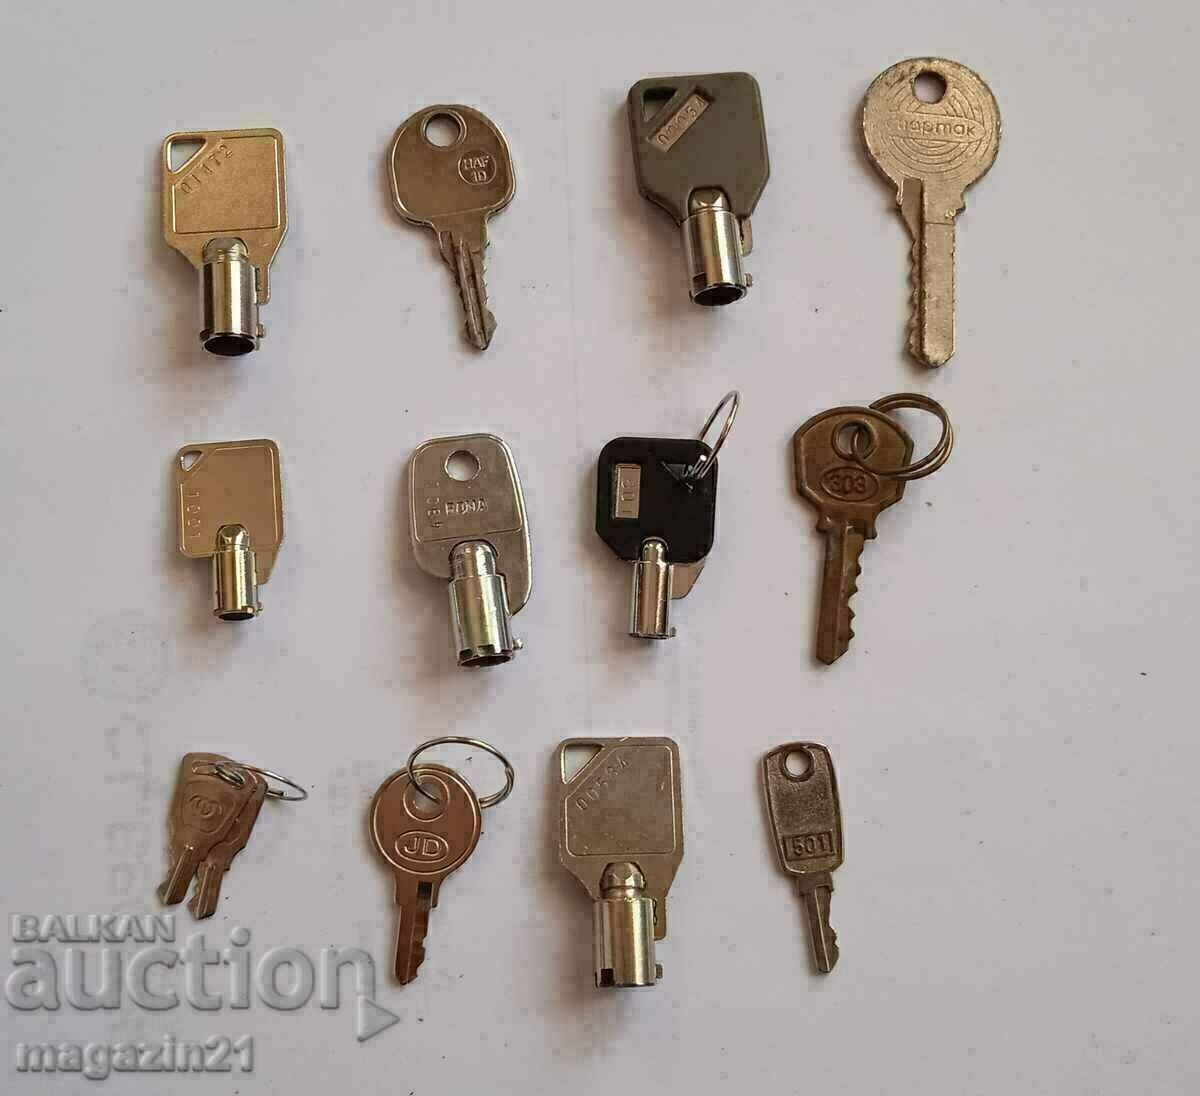 Lot of small old keys